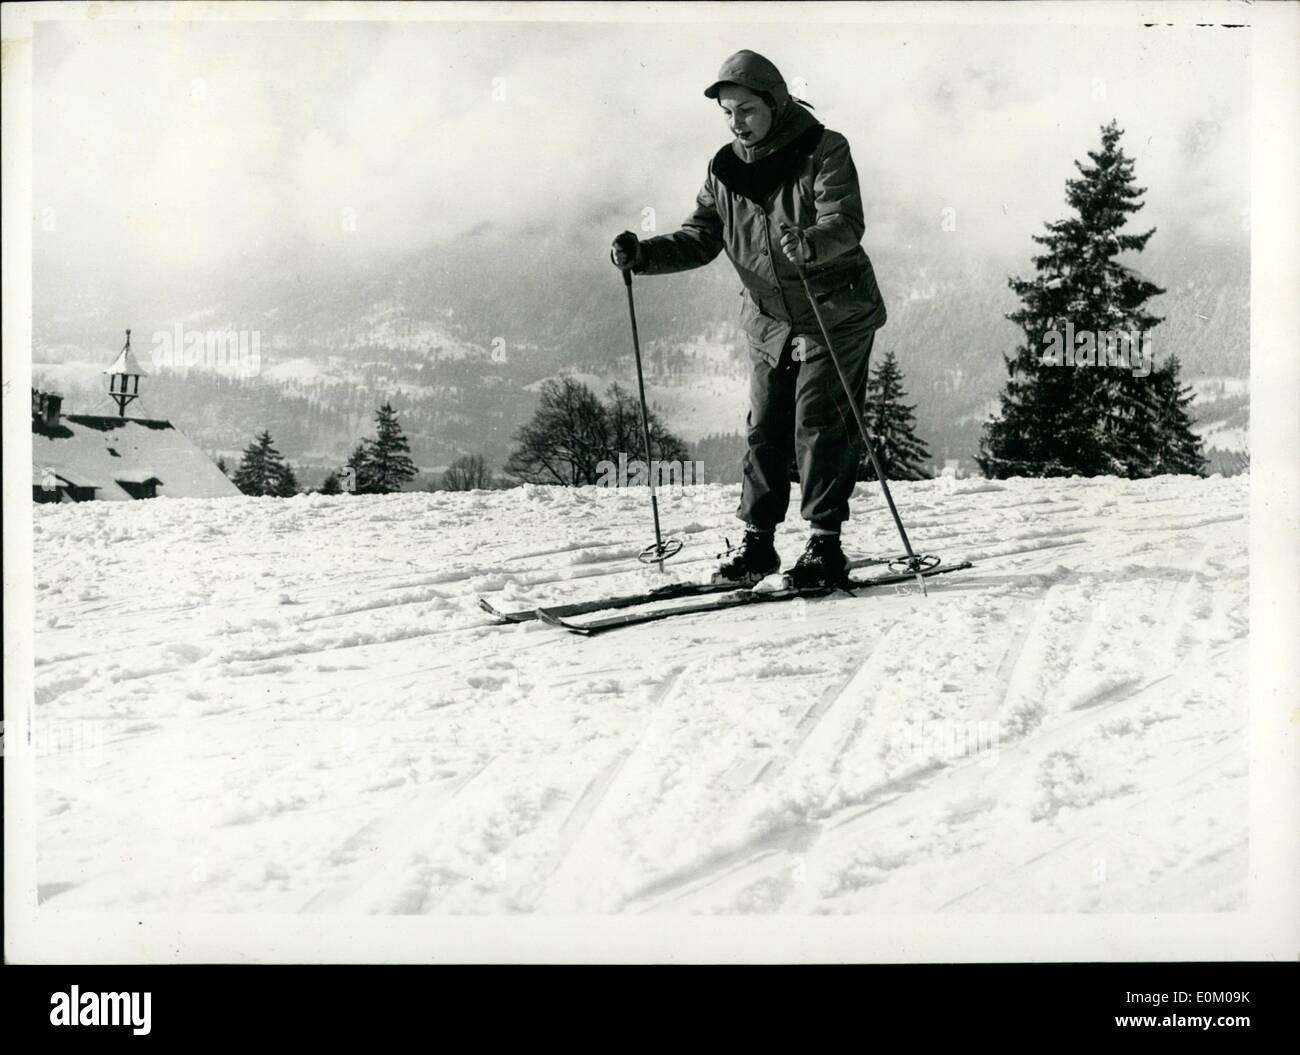 Jan. 01, 1953 - S.H.A.P.E. Commander On Holiday At Garmisch General Ridgway Goes Ski-Ing: General Ridgway, Supreme Commander of Stock Photo